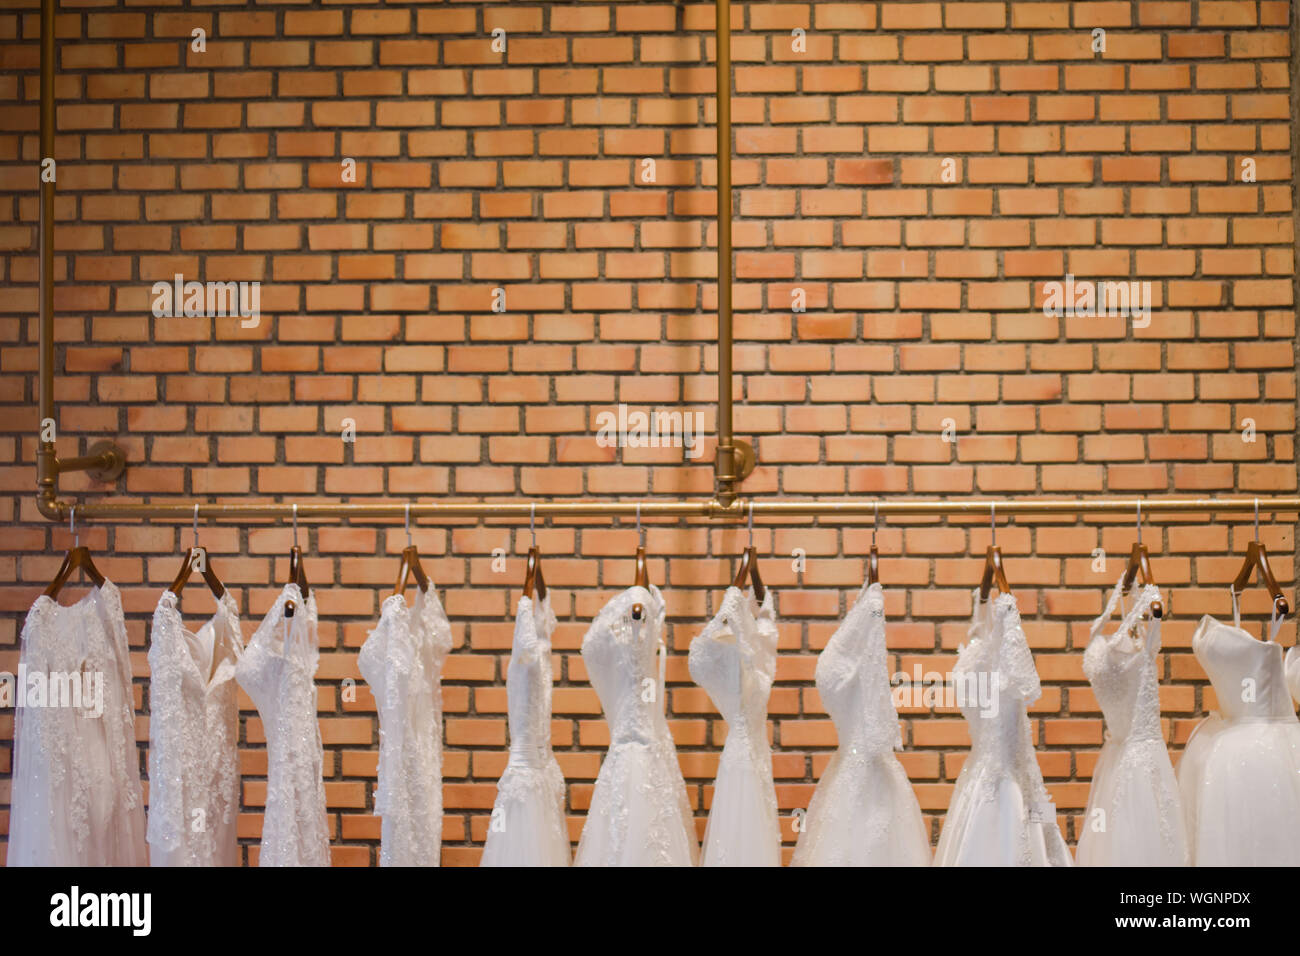 Dresses Hanging Against Brick Wall Stock Photo